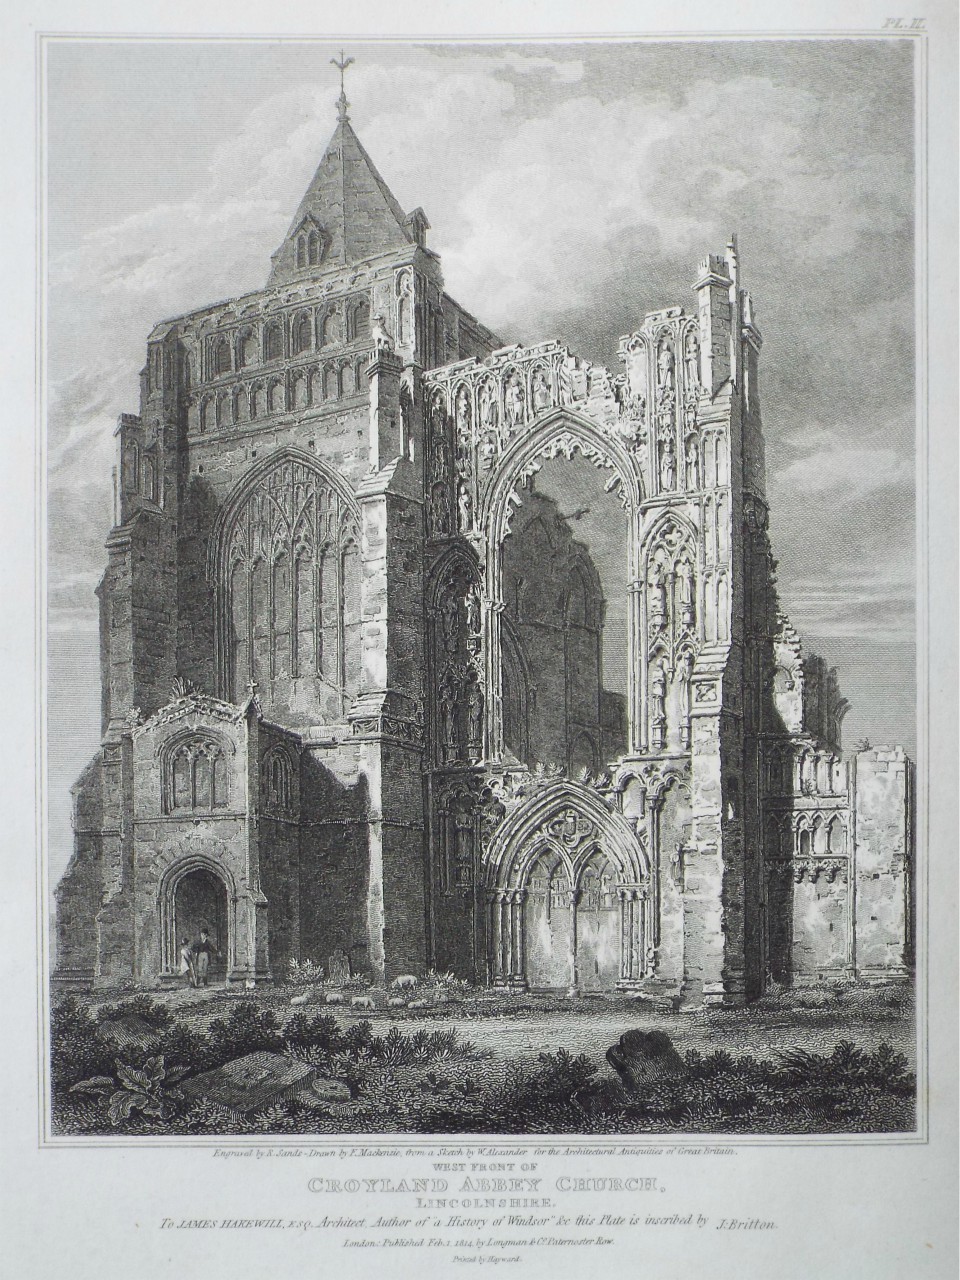 Print - West Front of Croyland Abbey Church, Lincolnshire. - Sands